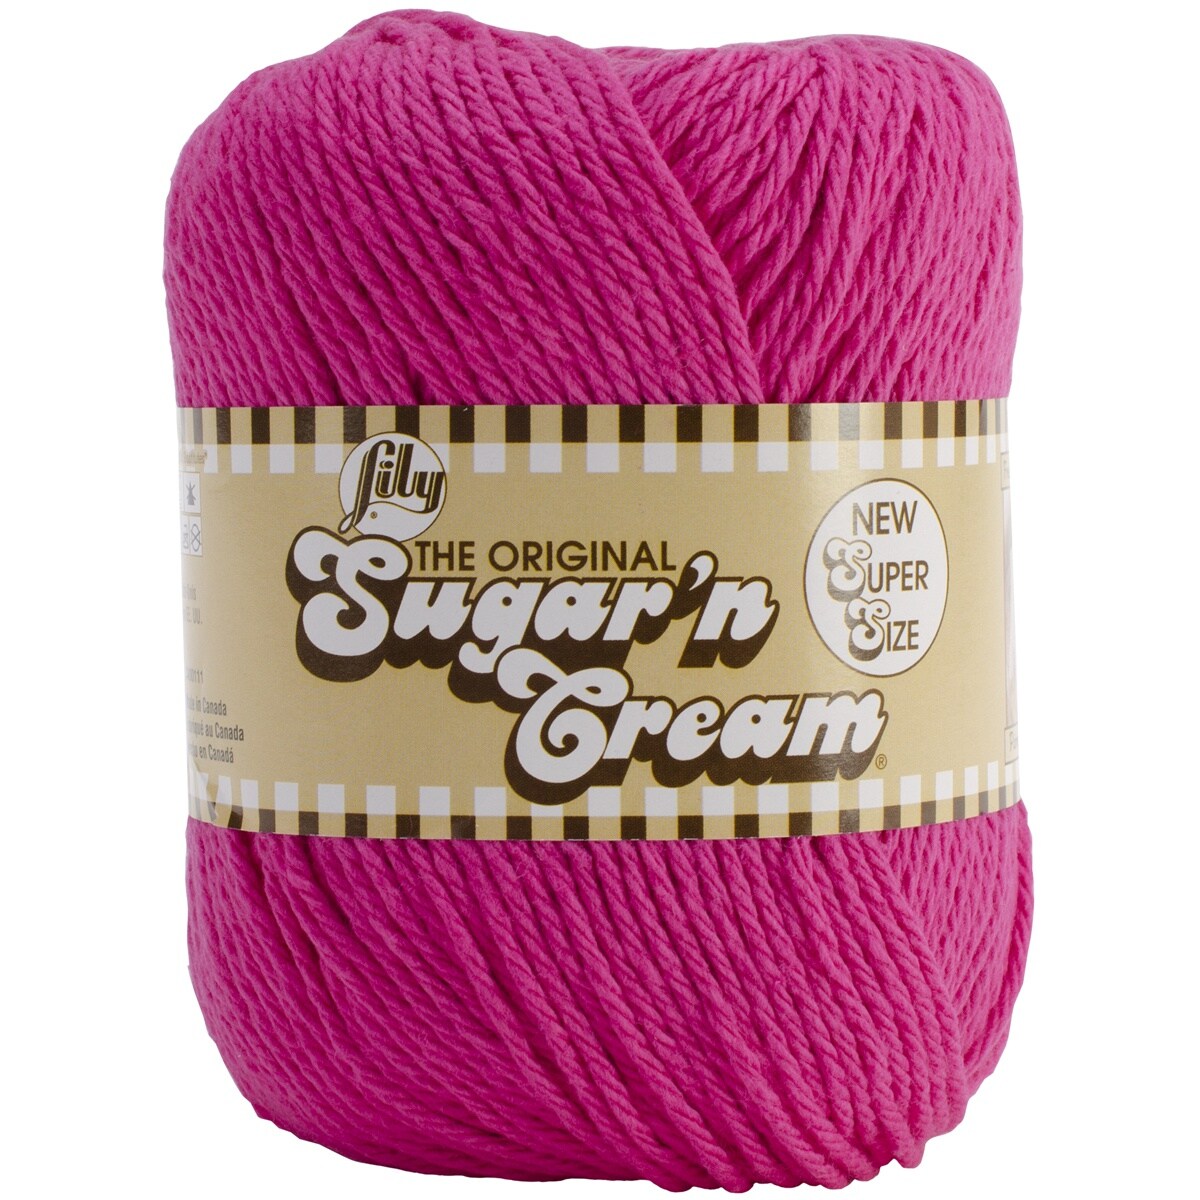  Pllieay Hot Pink Yarn for Crocheting and Knitting (4x50g)  Cotton Yarn for Crocheting Crochet Knitting Yarn with Easy-to-See Stitches  Yarn for Beginners - Worsted Medium #4 Yarn - Cotton-Nylon Blend